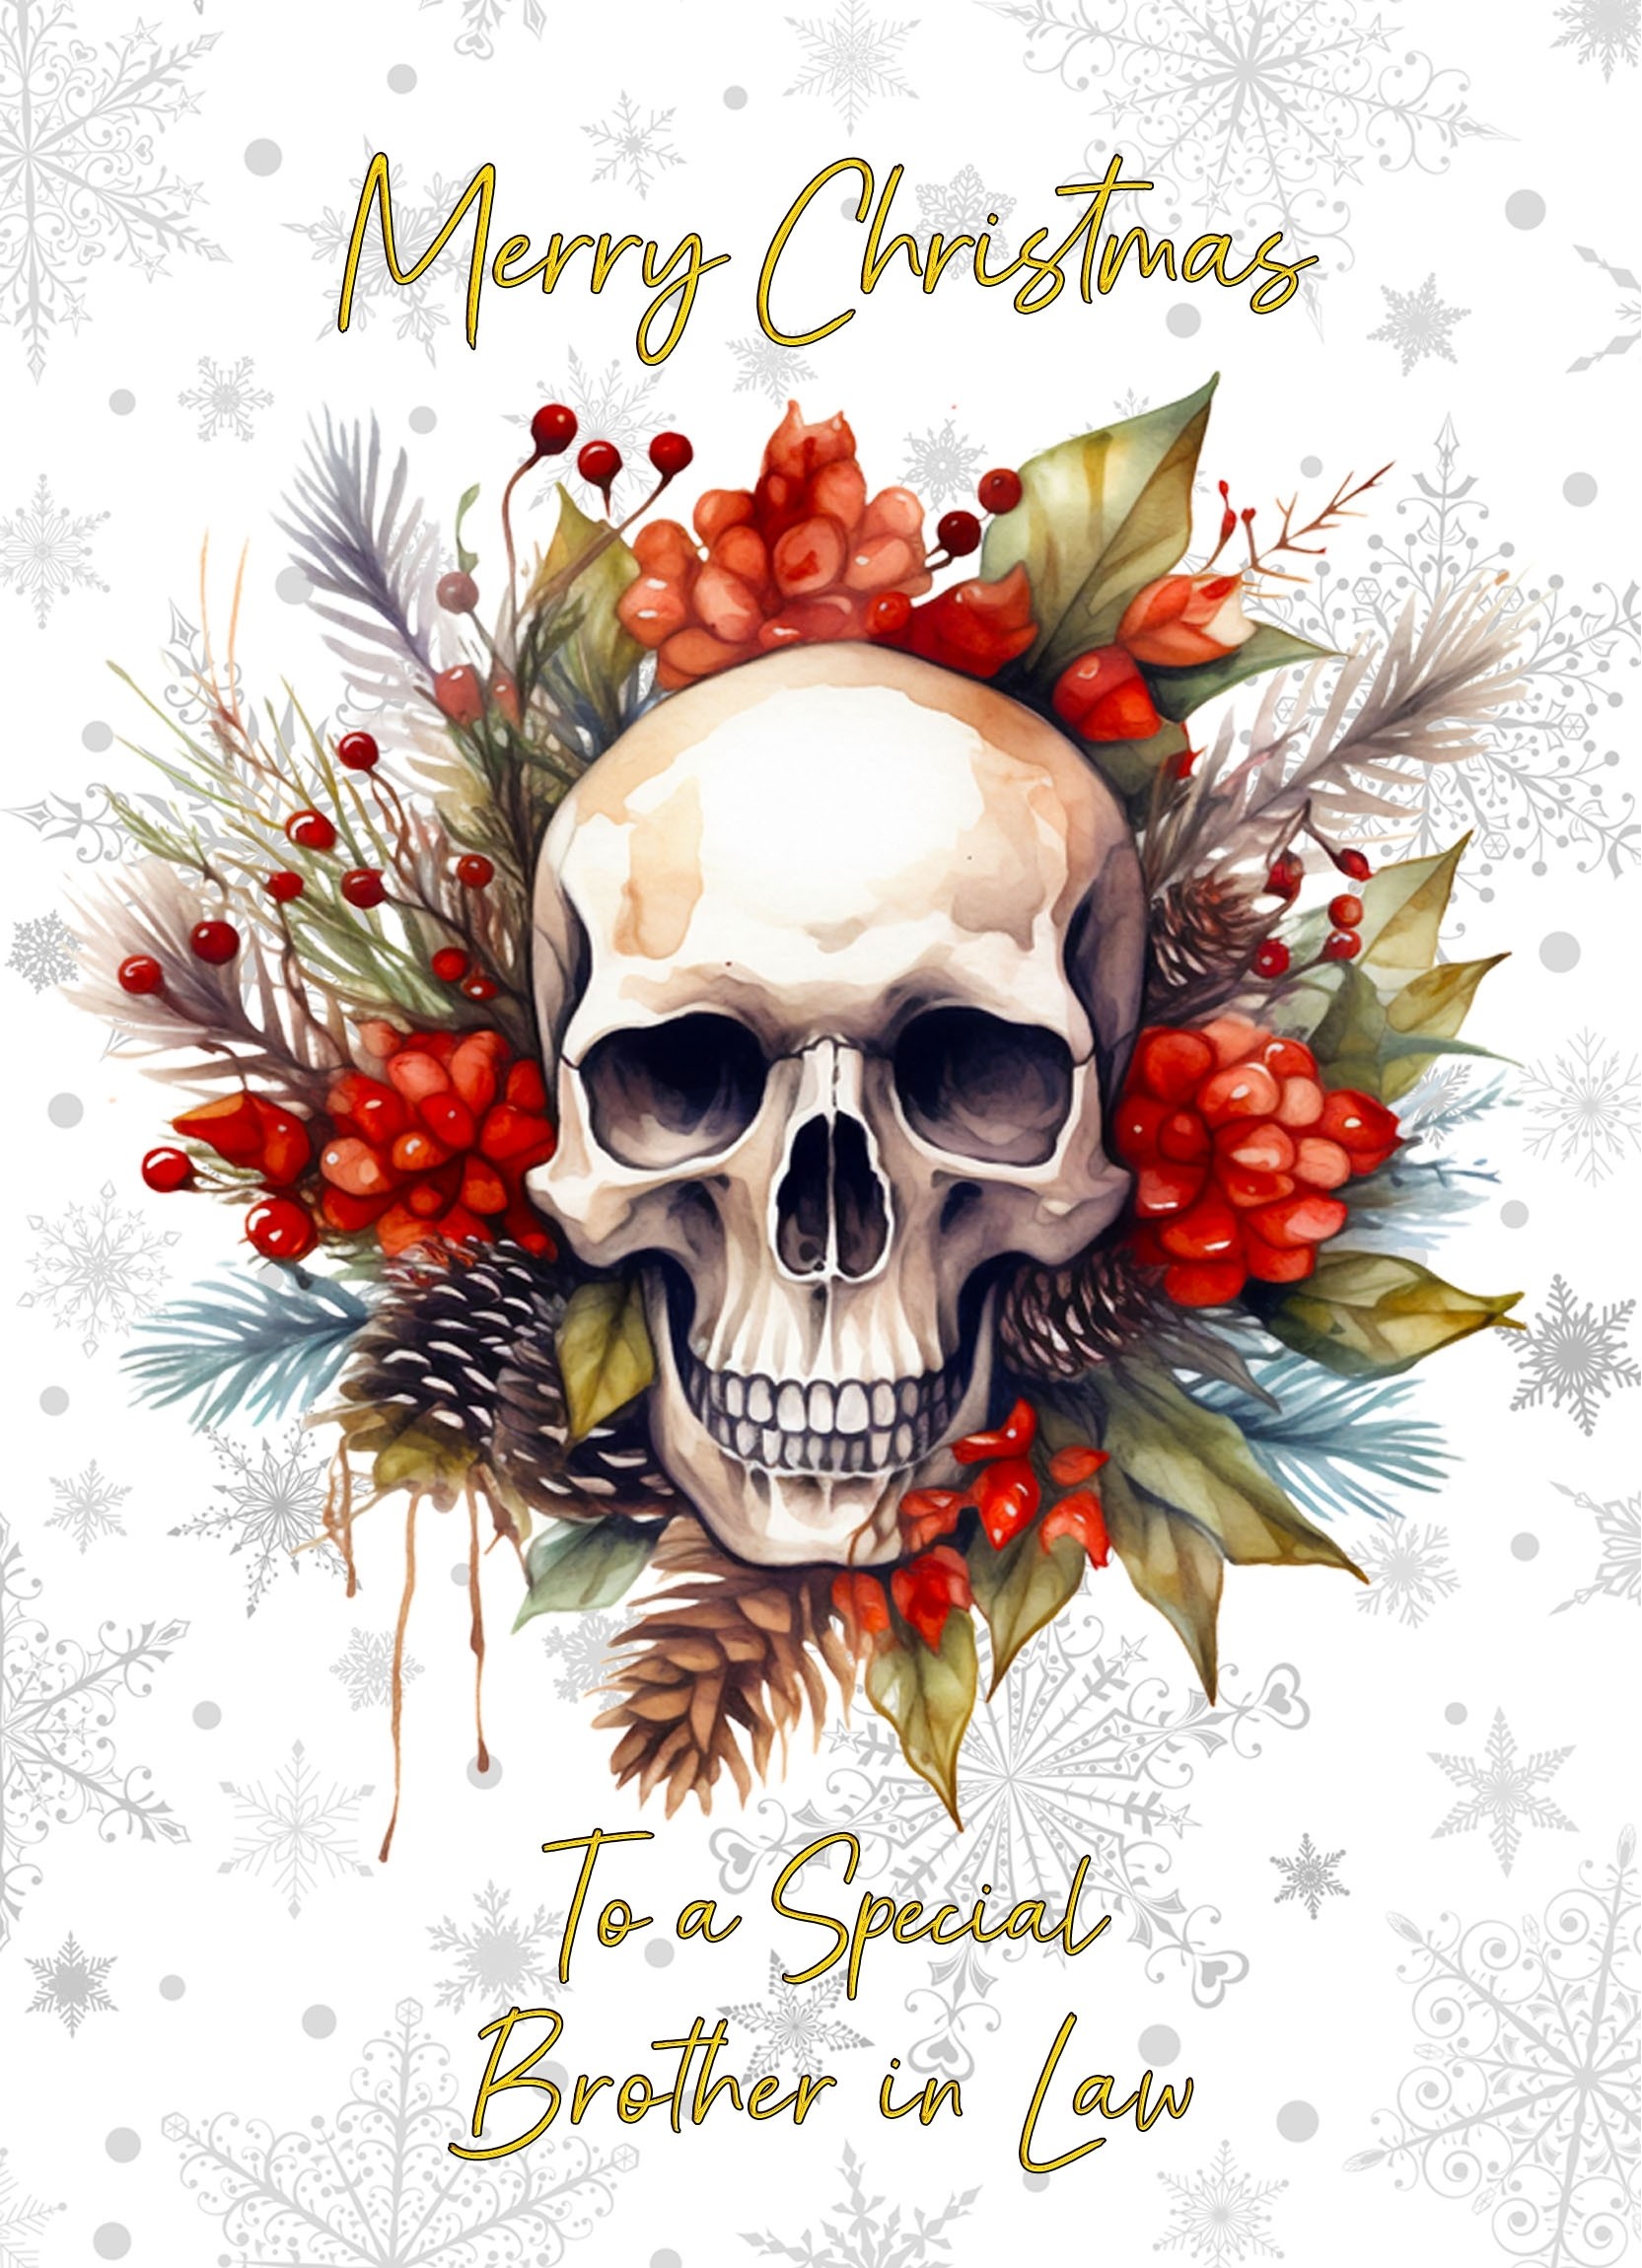 Christmas Card For Brother in Law (Gothic Fantasy Skull Wreath)